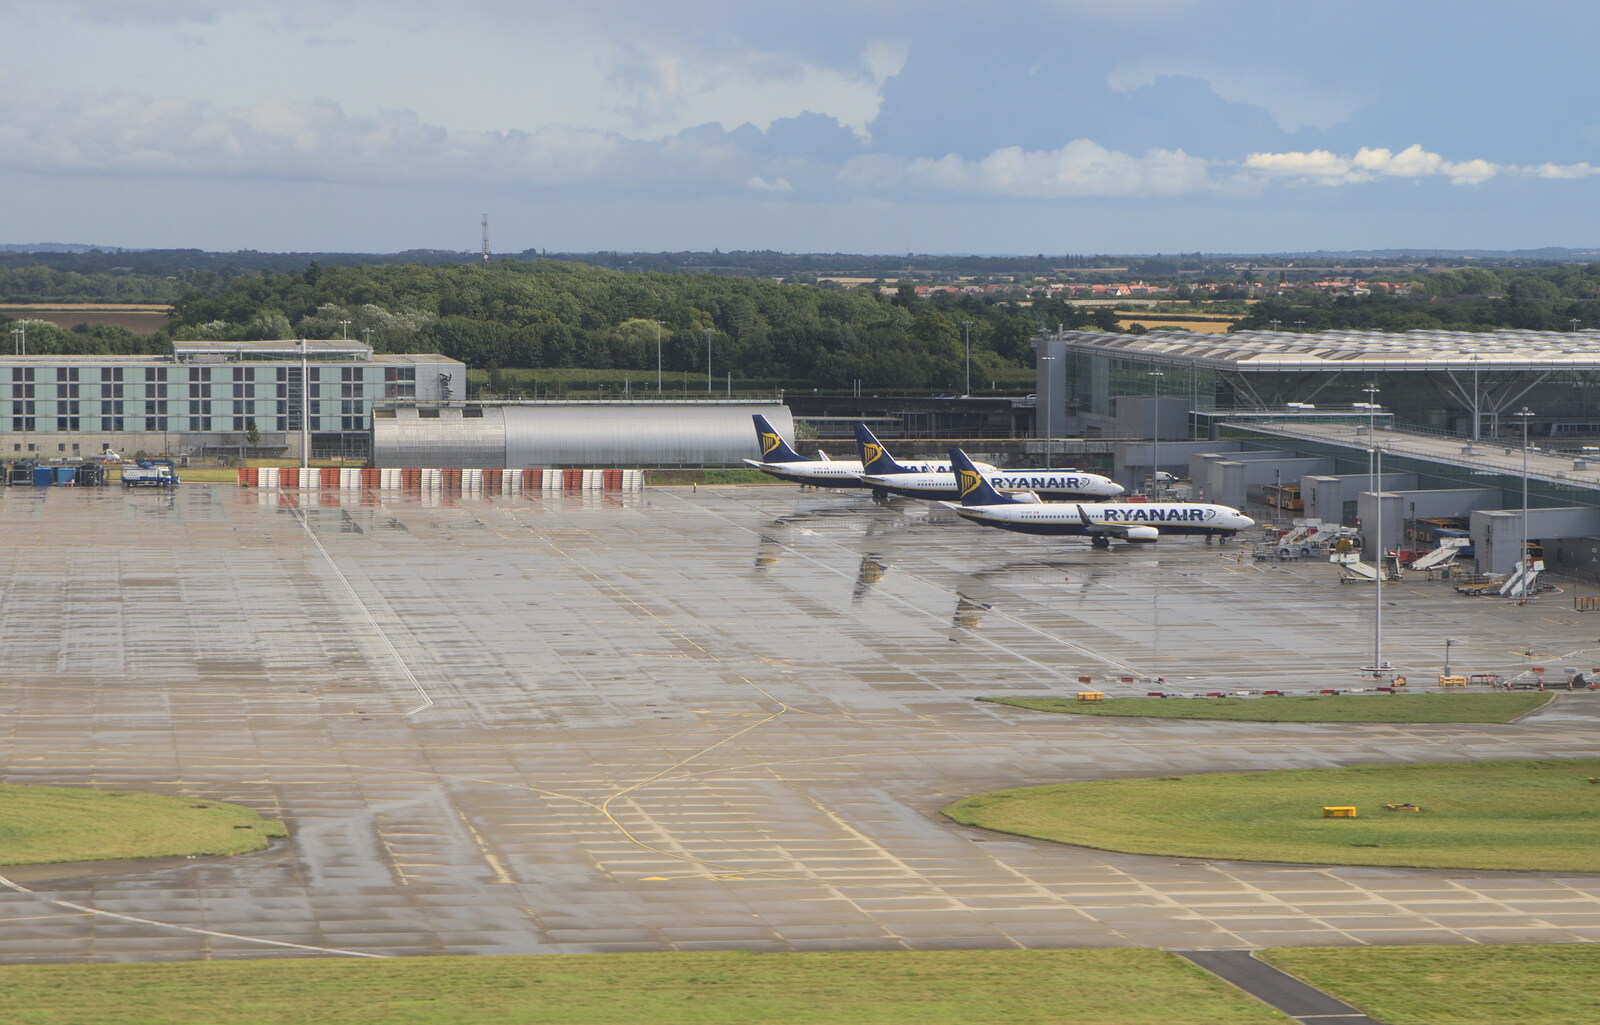 Ruinair 737s parked at Stansted airport from A Night Out in Dublin, County Dublin, Ireland - 9th August 2014